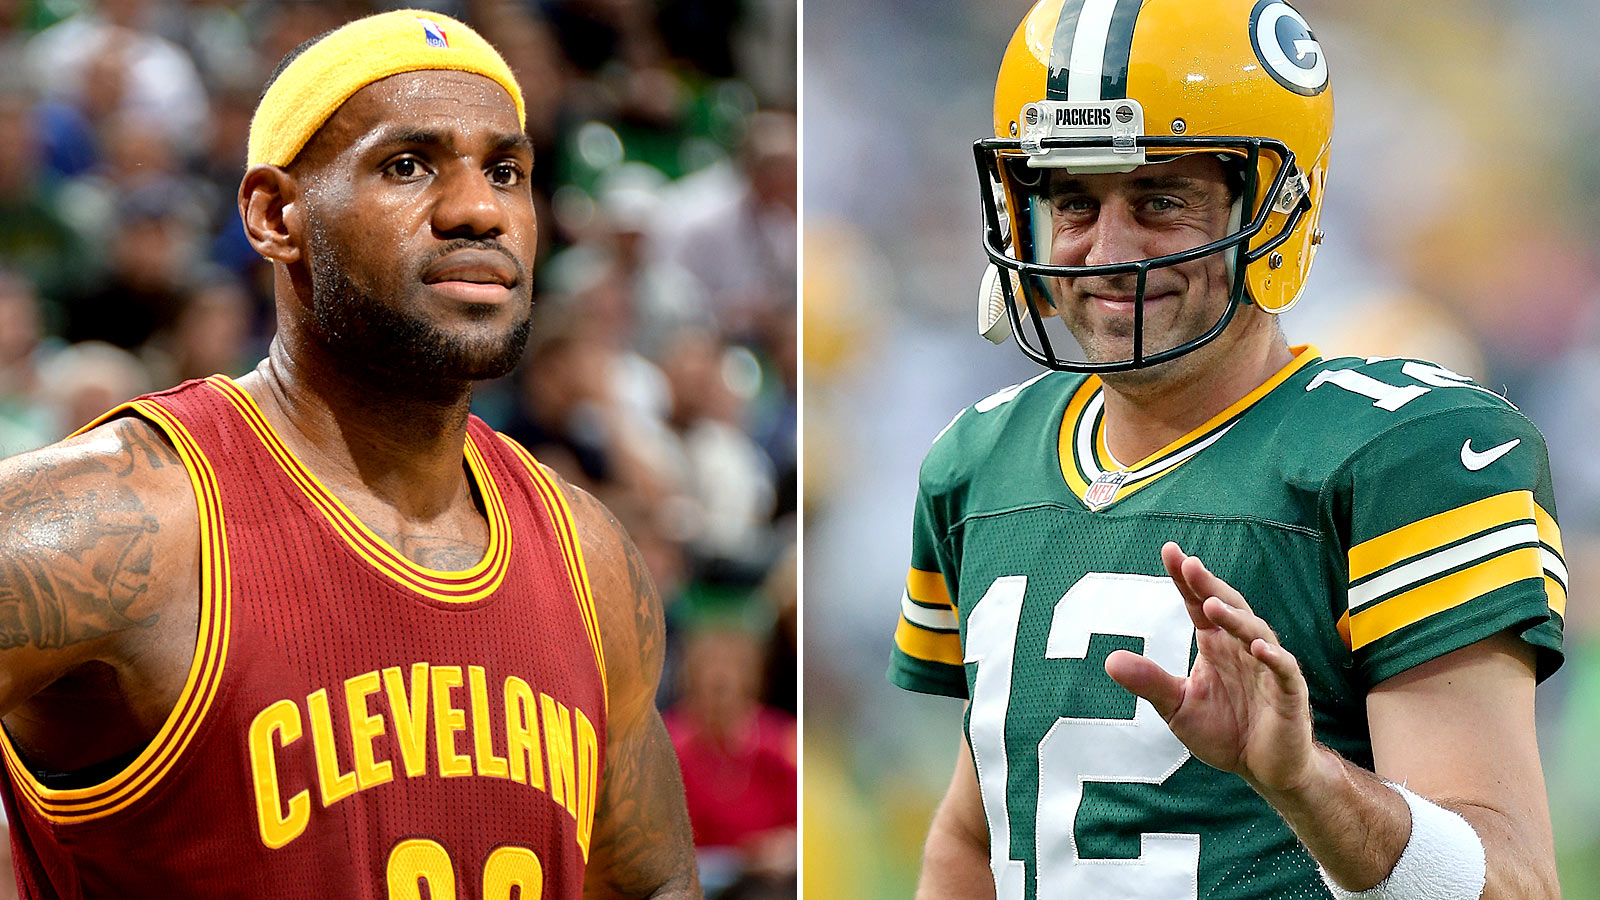 LeBron says 'RELAX,' quoting 'the great' Aaron Rodgers